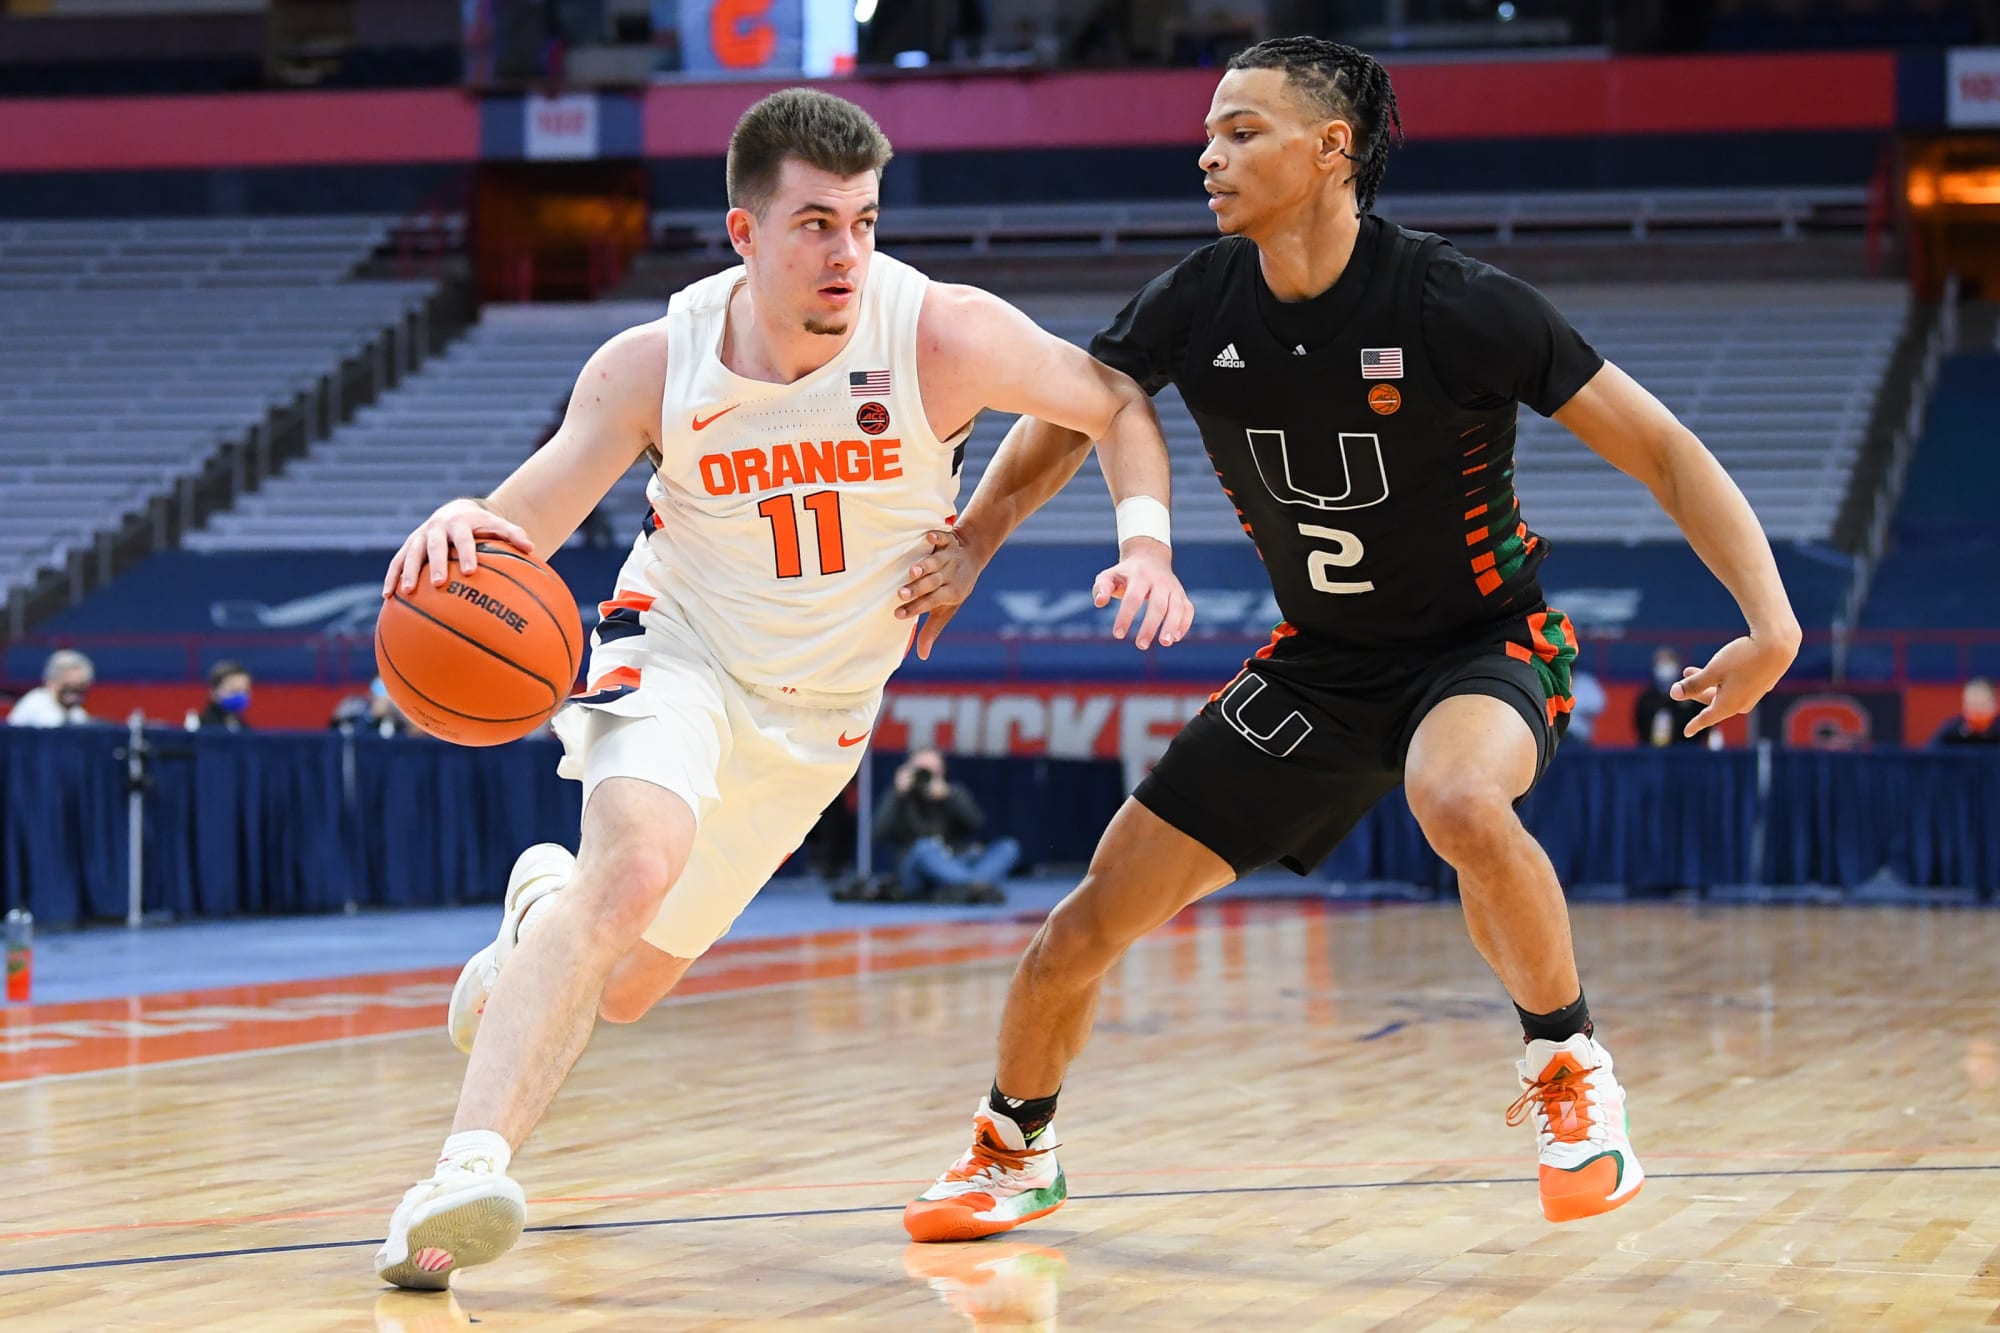 Syracuse Basketball: Starting guards had Covid, let’s cut them some slack